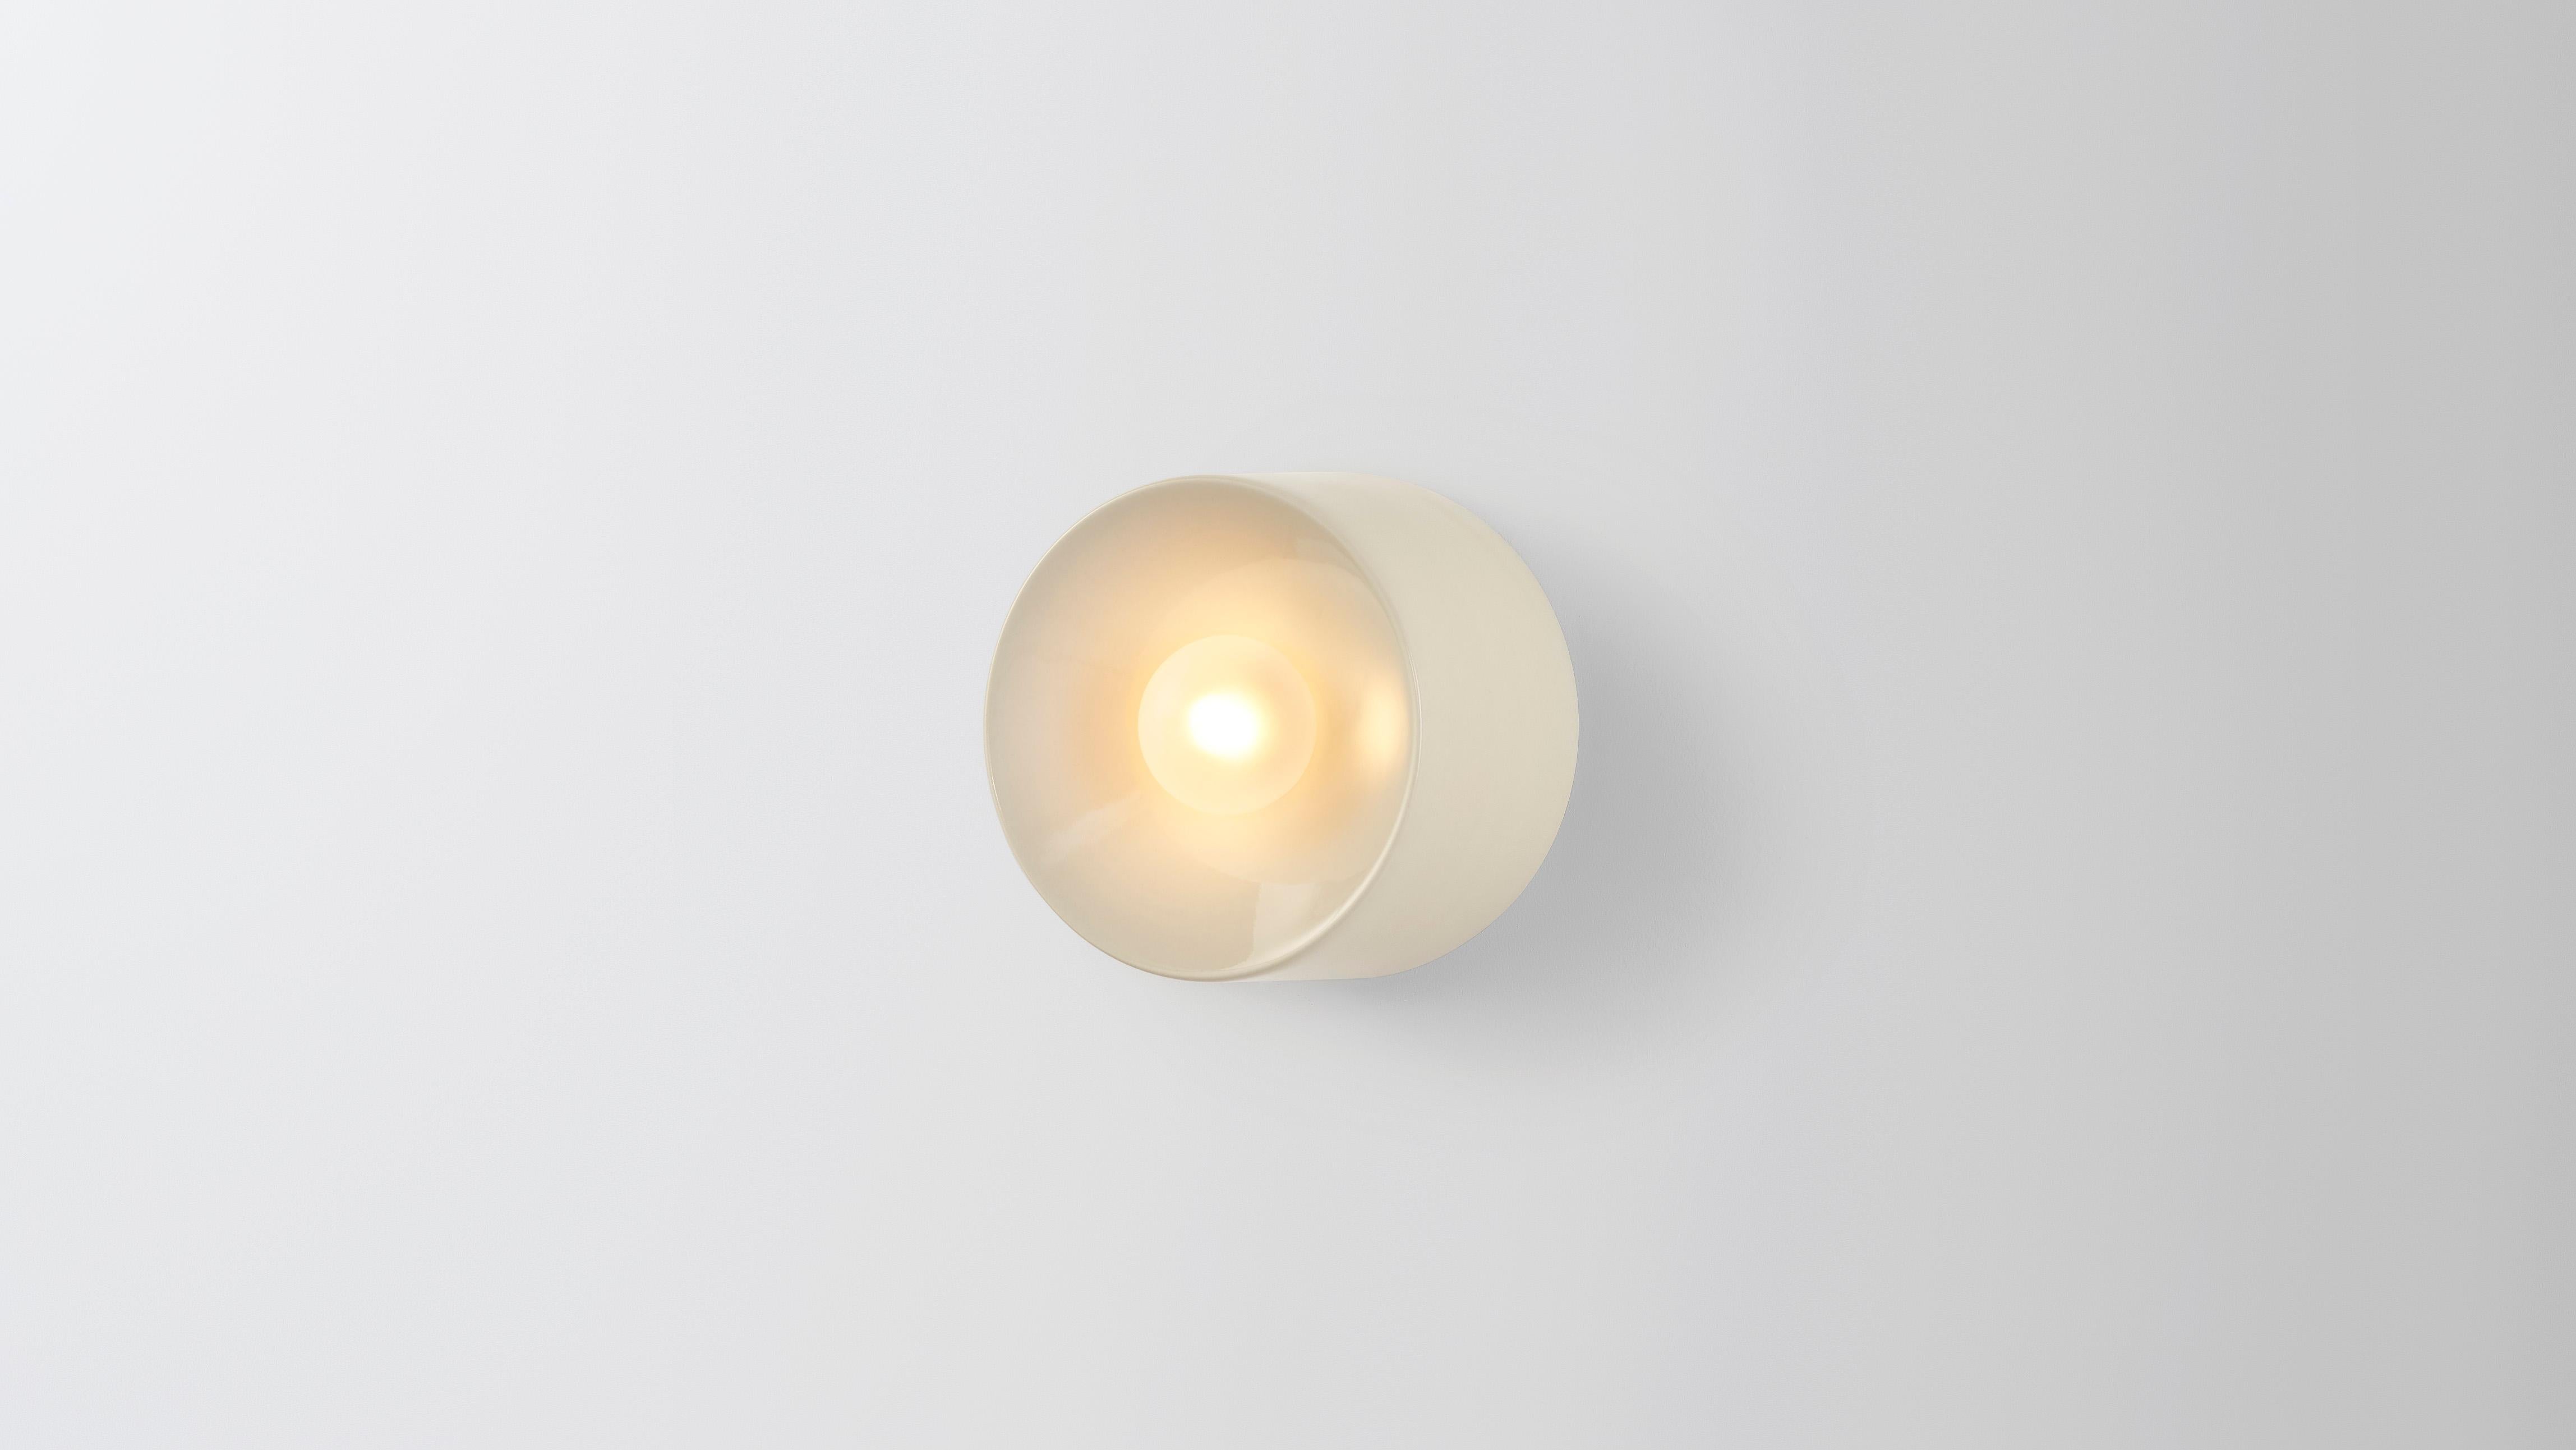 Anton mini in ceramic by Volker Haug 
Anton series
Dimensions: W 13 H 13 D 8.3 cm
Materials: Cast Ceramic
Glaze: Clear
Lamp: G9 LED (240V / 120V US). 12V option available
Glass bulb : 4.5 cm ø, Frosted
Weight: 1kg

Anton Mini (Ø13 cm) is